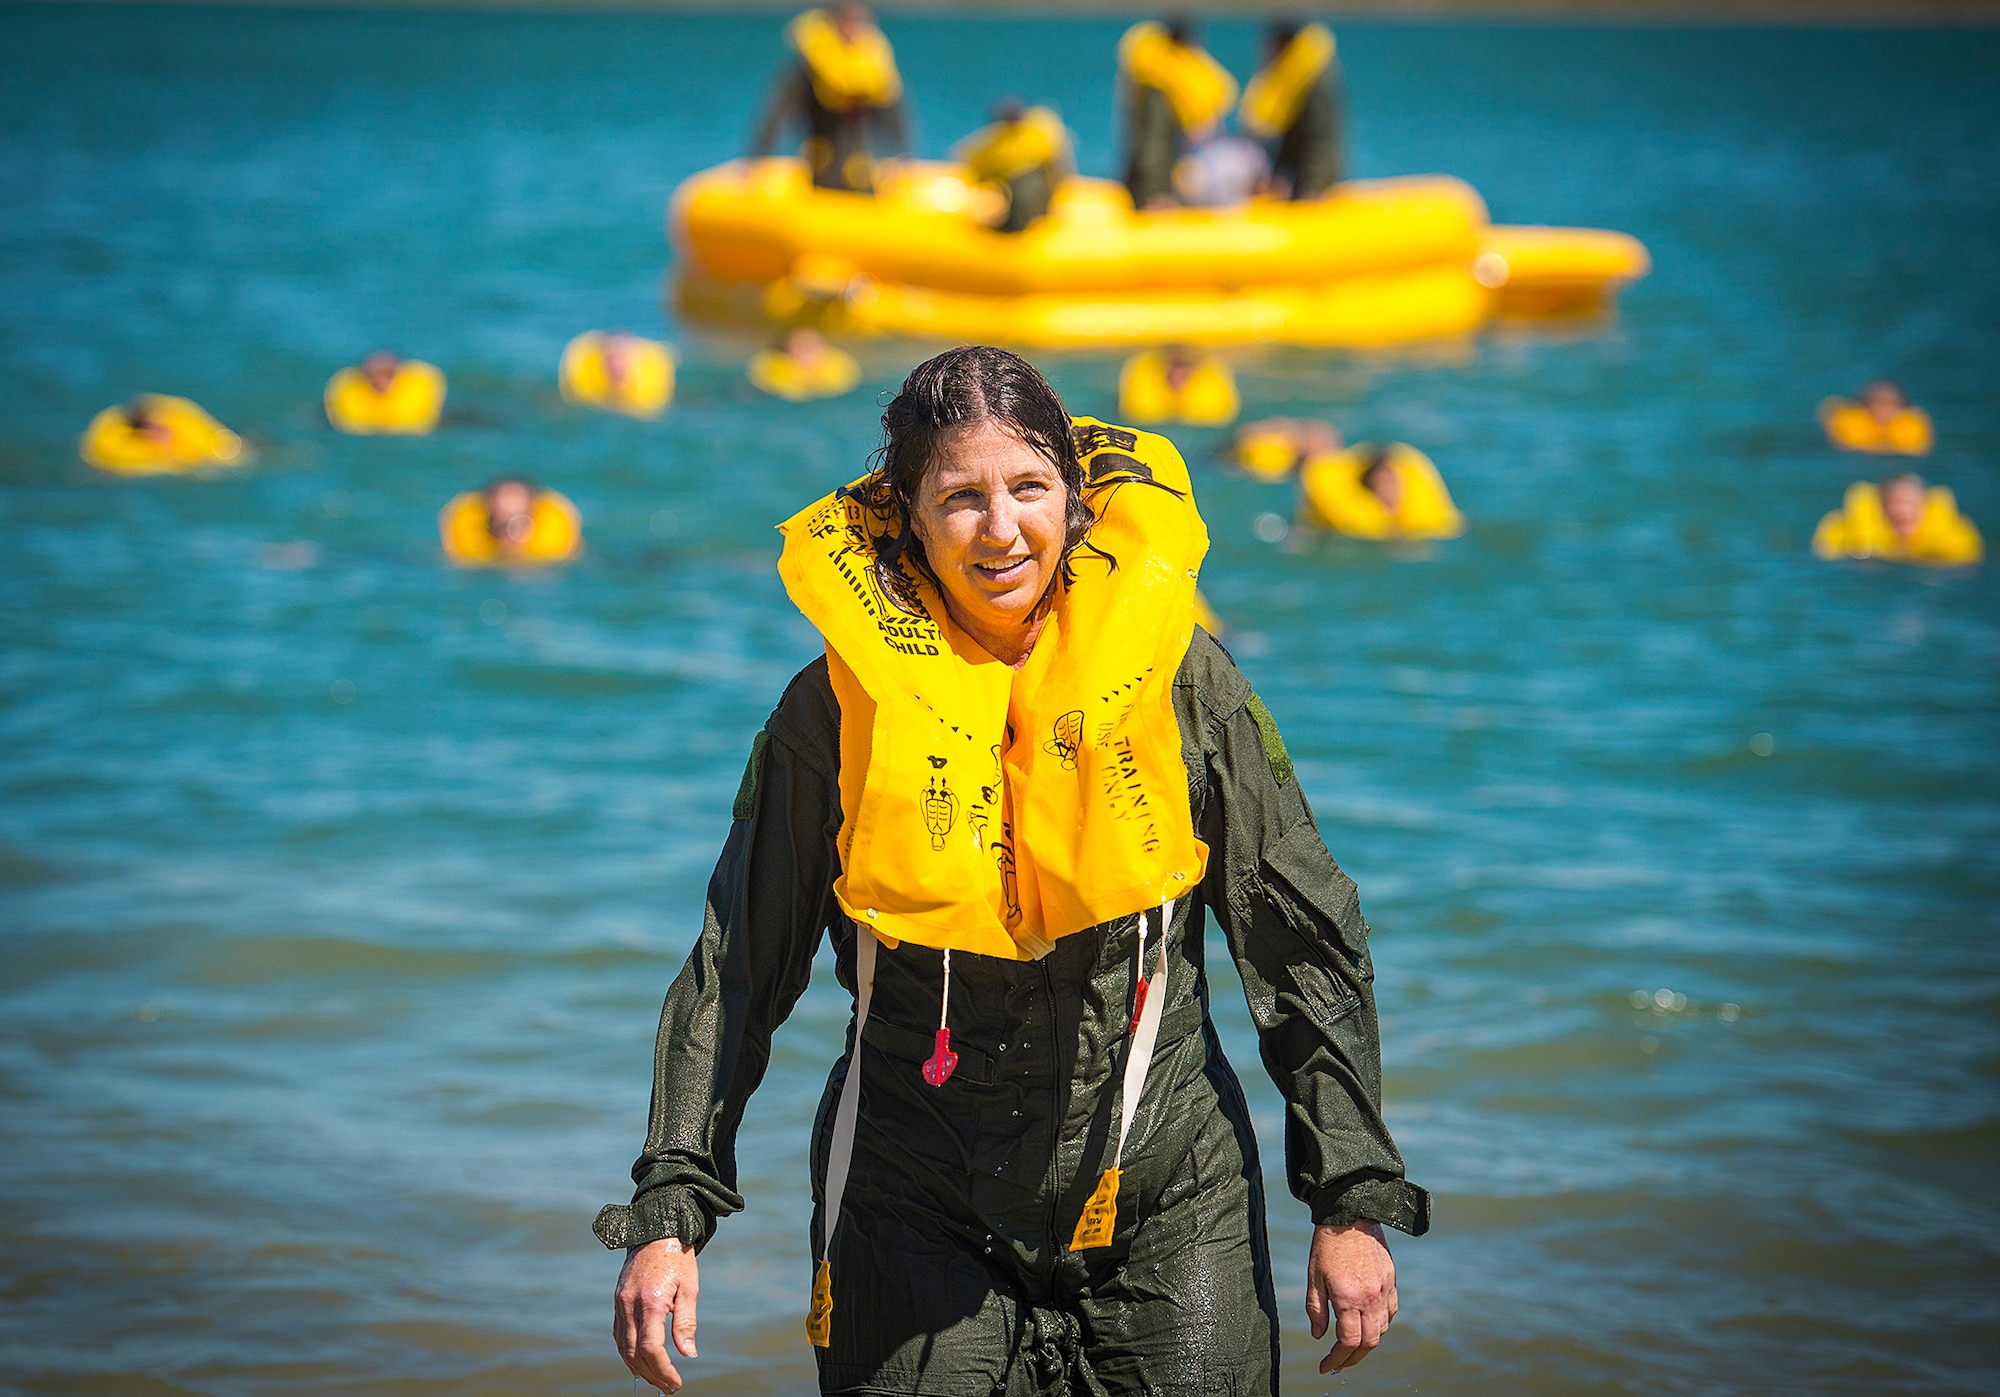 Lt. Col. Debbie Deja, 433rd Aeromedical Evacuation Squadron director of operations, emerges from the water after finishing life raft training May 5, 2017 at Joint Base San Antonio-Canyon Lake. The triannual training is a requirement for all aircrew Air Force Specialty Codes and includes open water swimming and life raft training. (U.S. Air Force photo by Benjamin Faske)